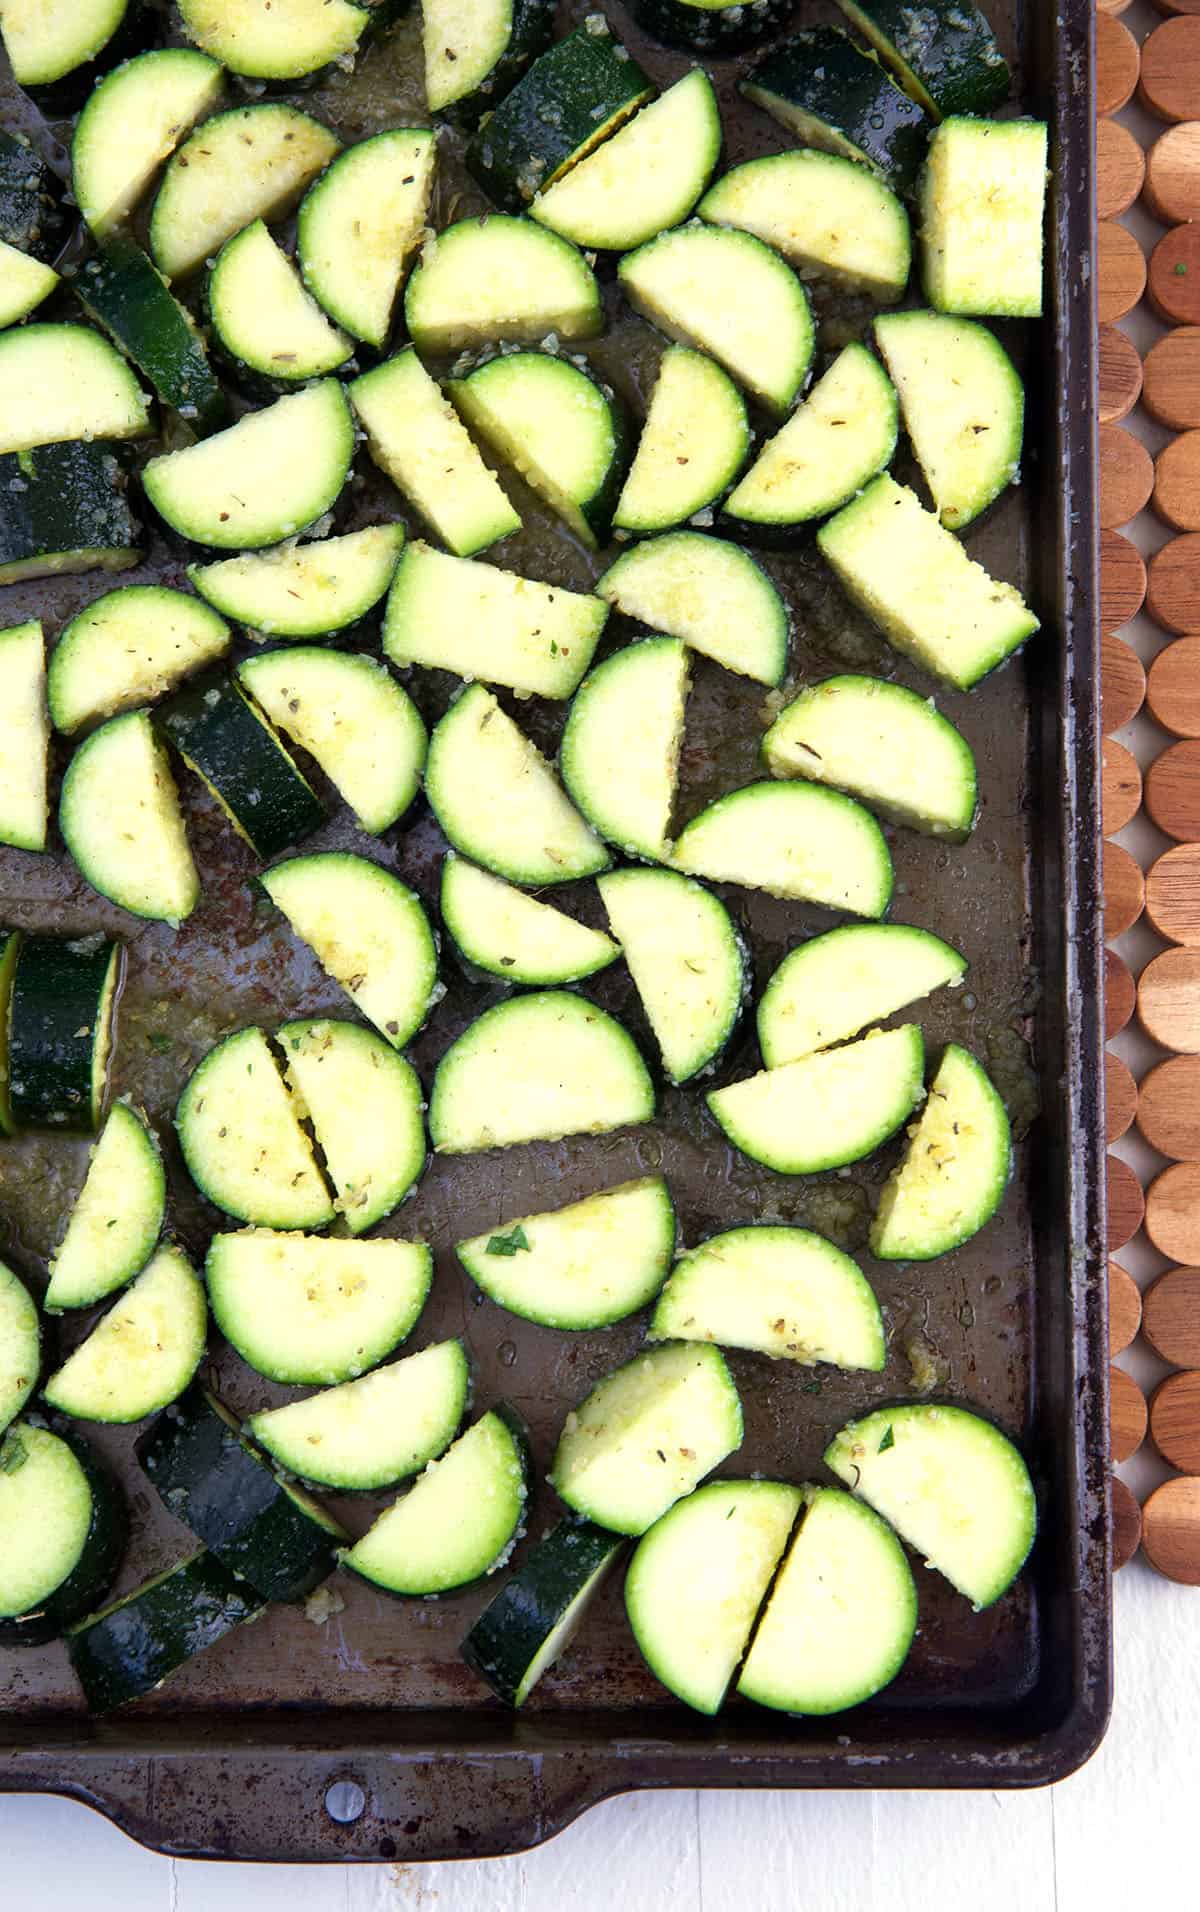 Chopped fresh zucchini is spread out on a baking sheet.